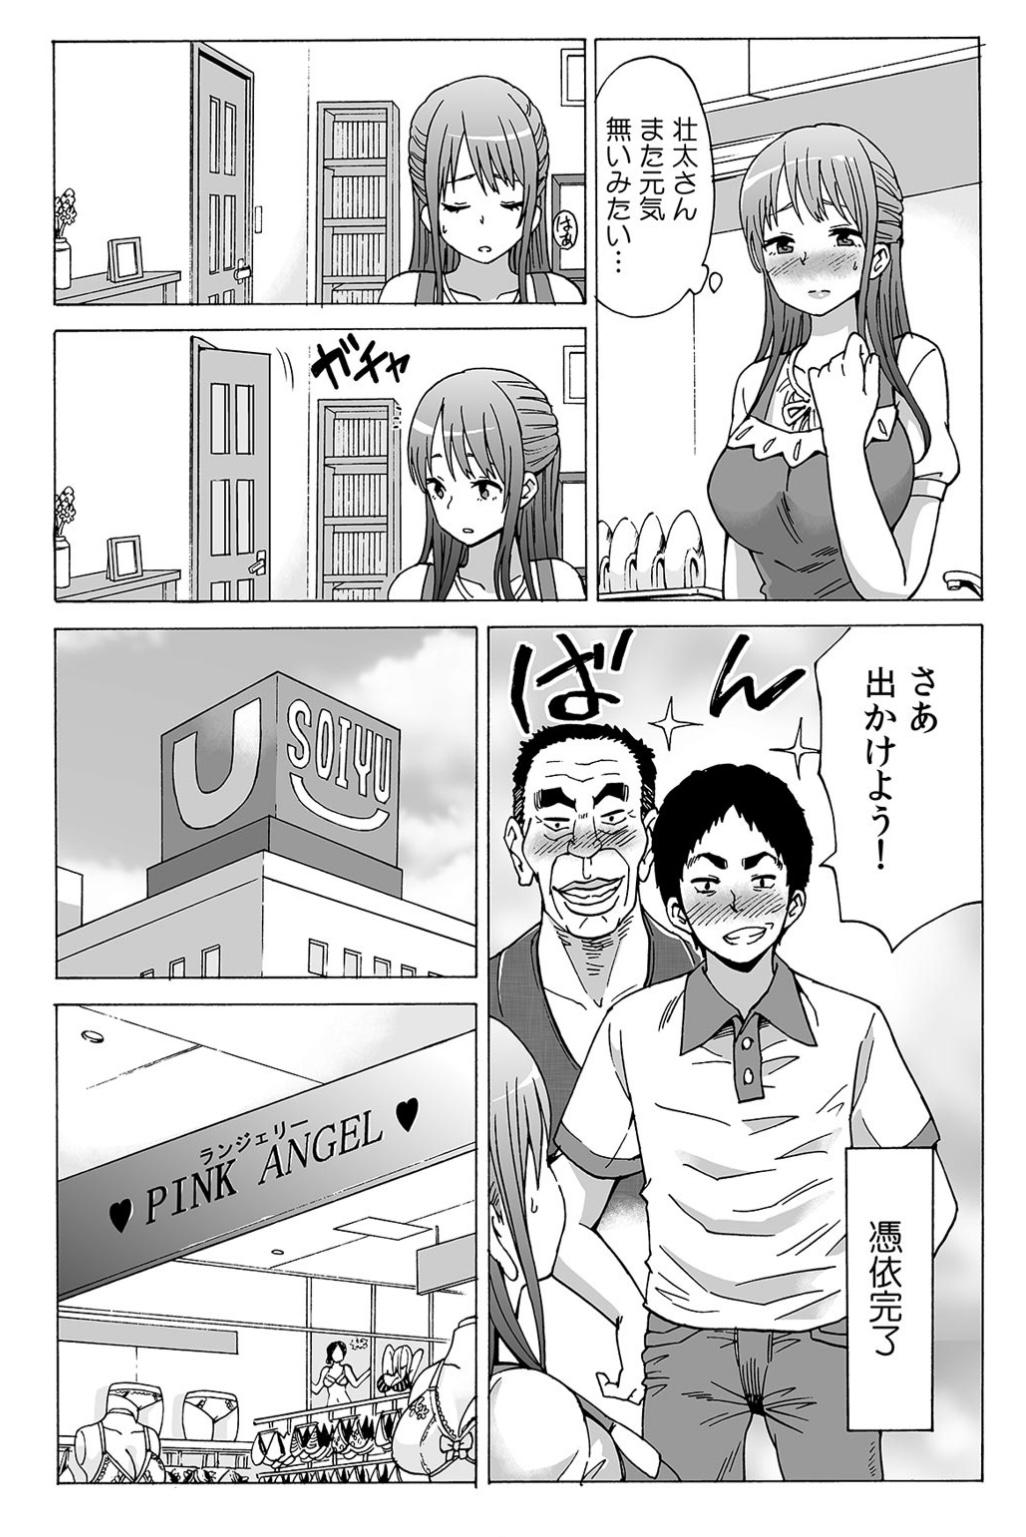 [Motaro / Akahige] My first partner is ... my father-in-law!? 1 29